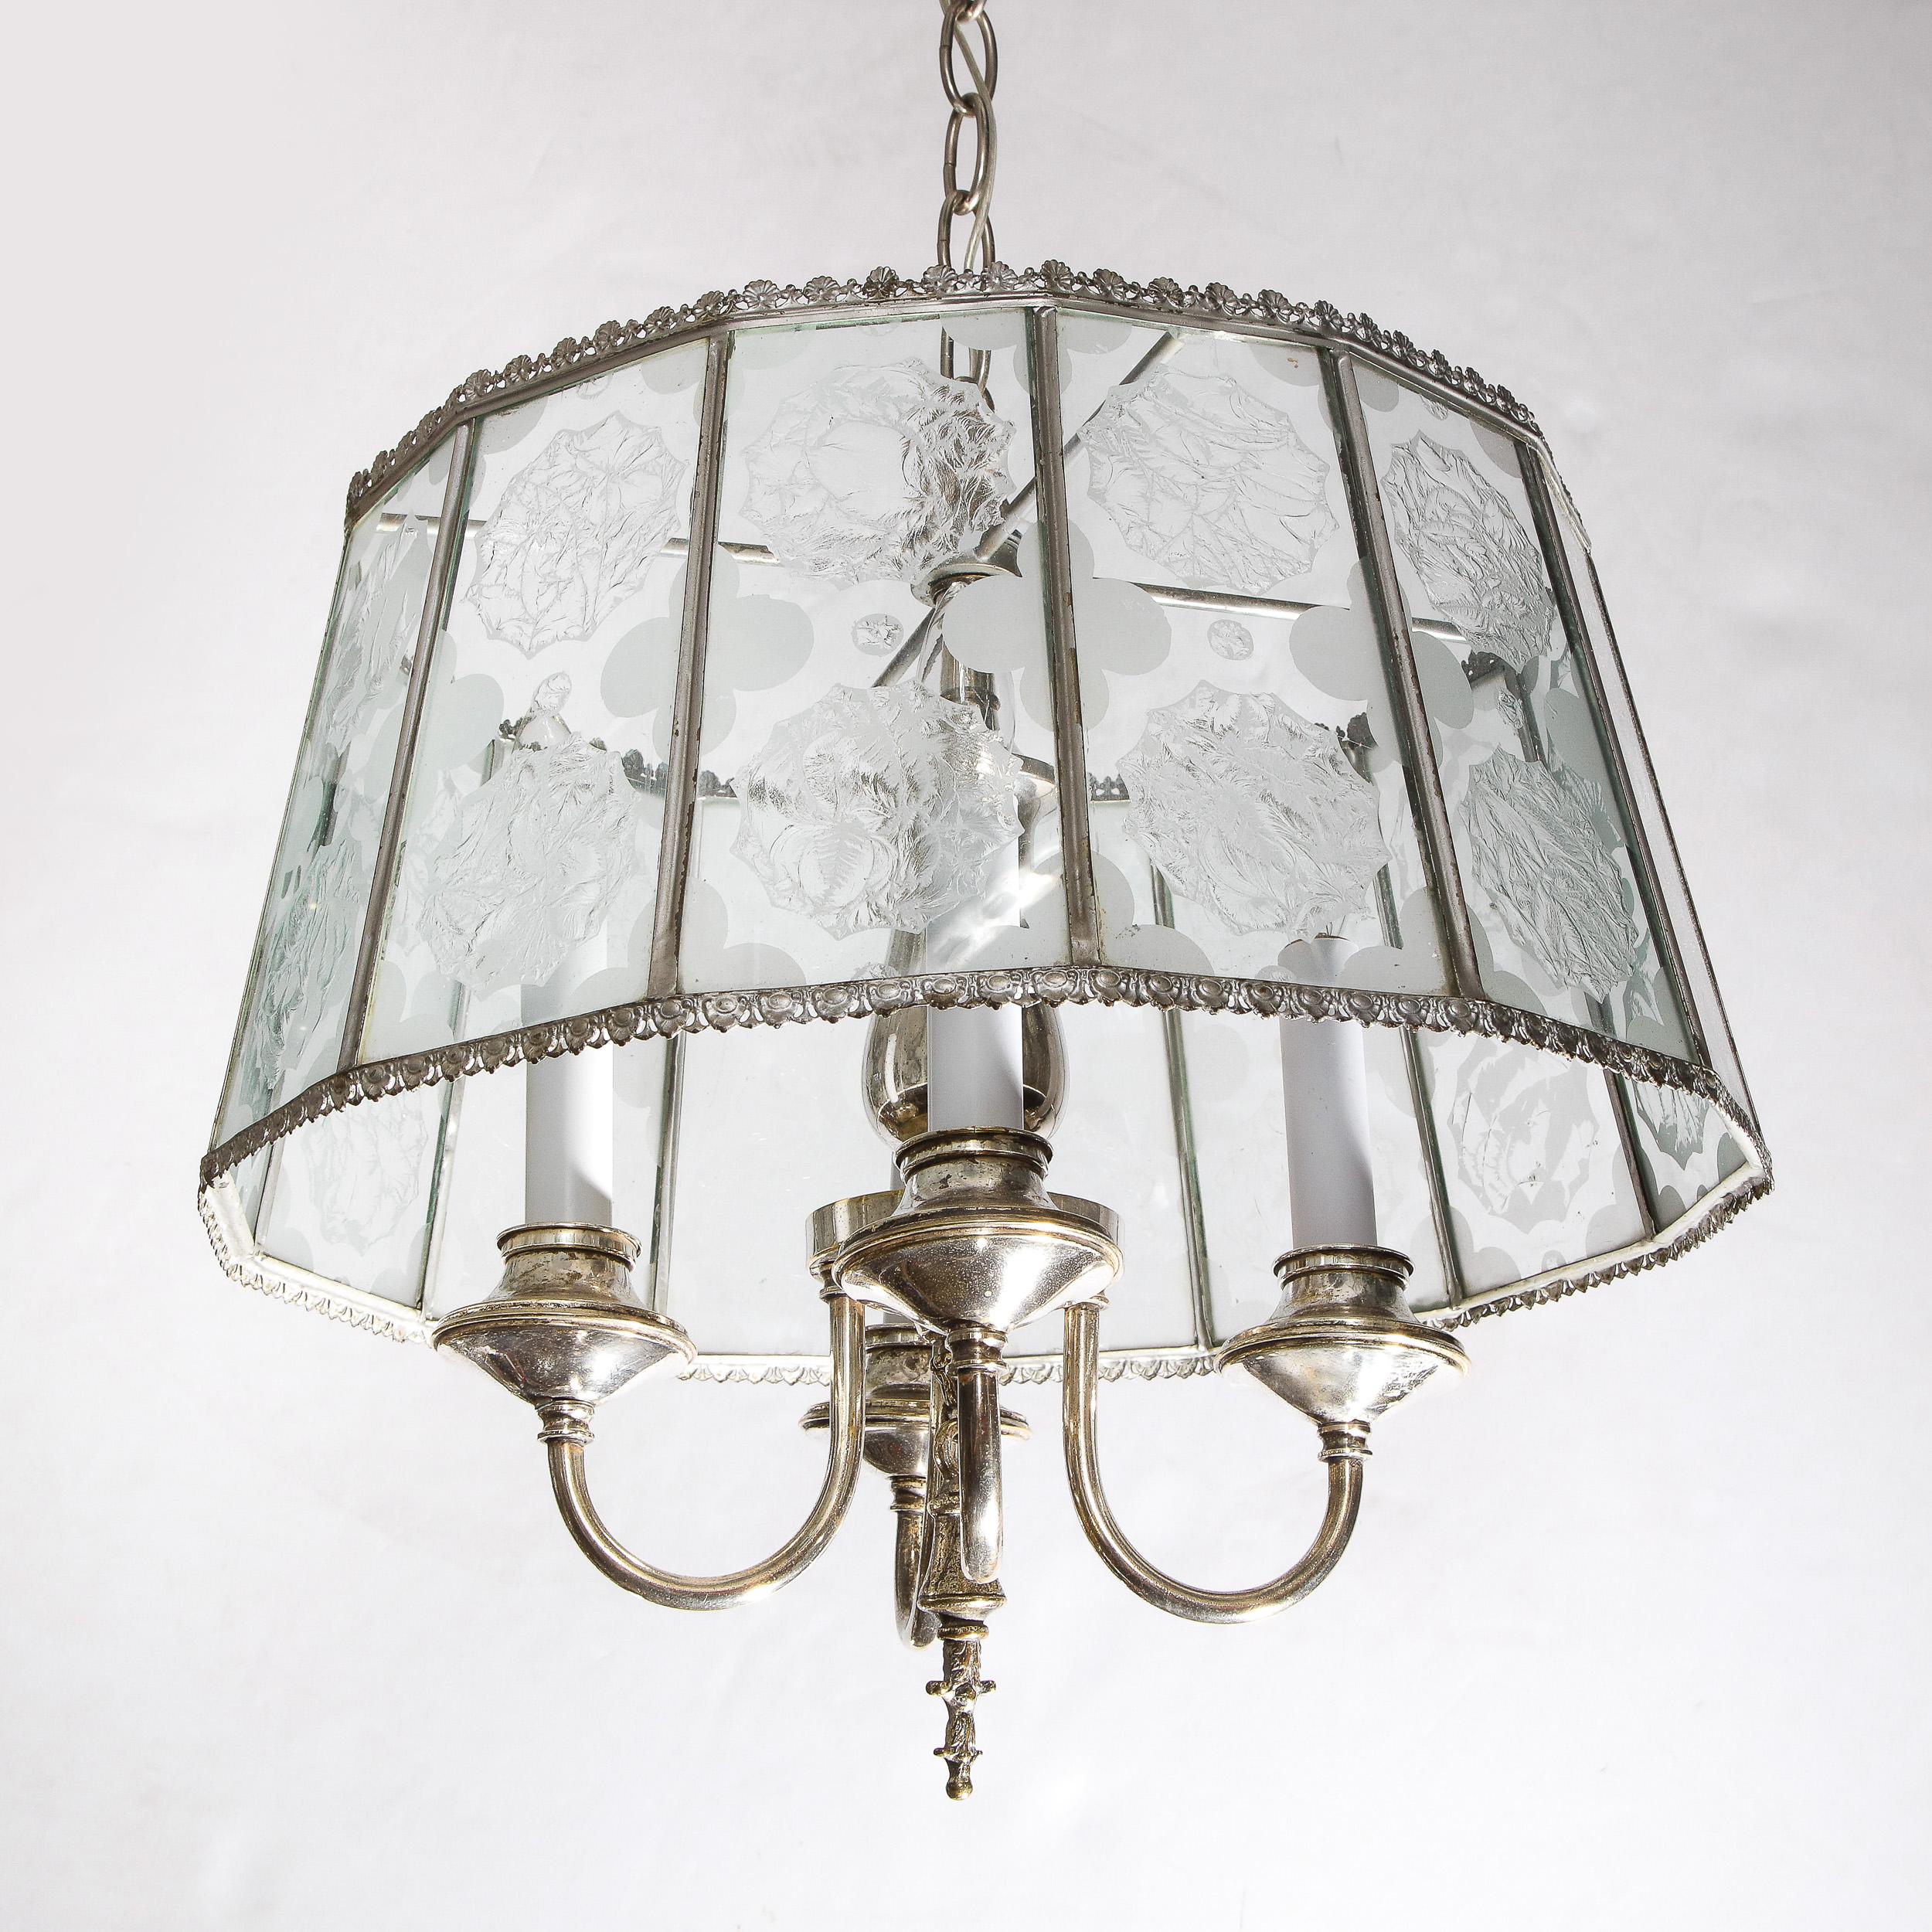 American Art Deco Revival Lantern Translucent Glass Pendant with Silvered Fittings